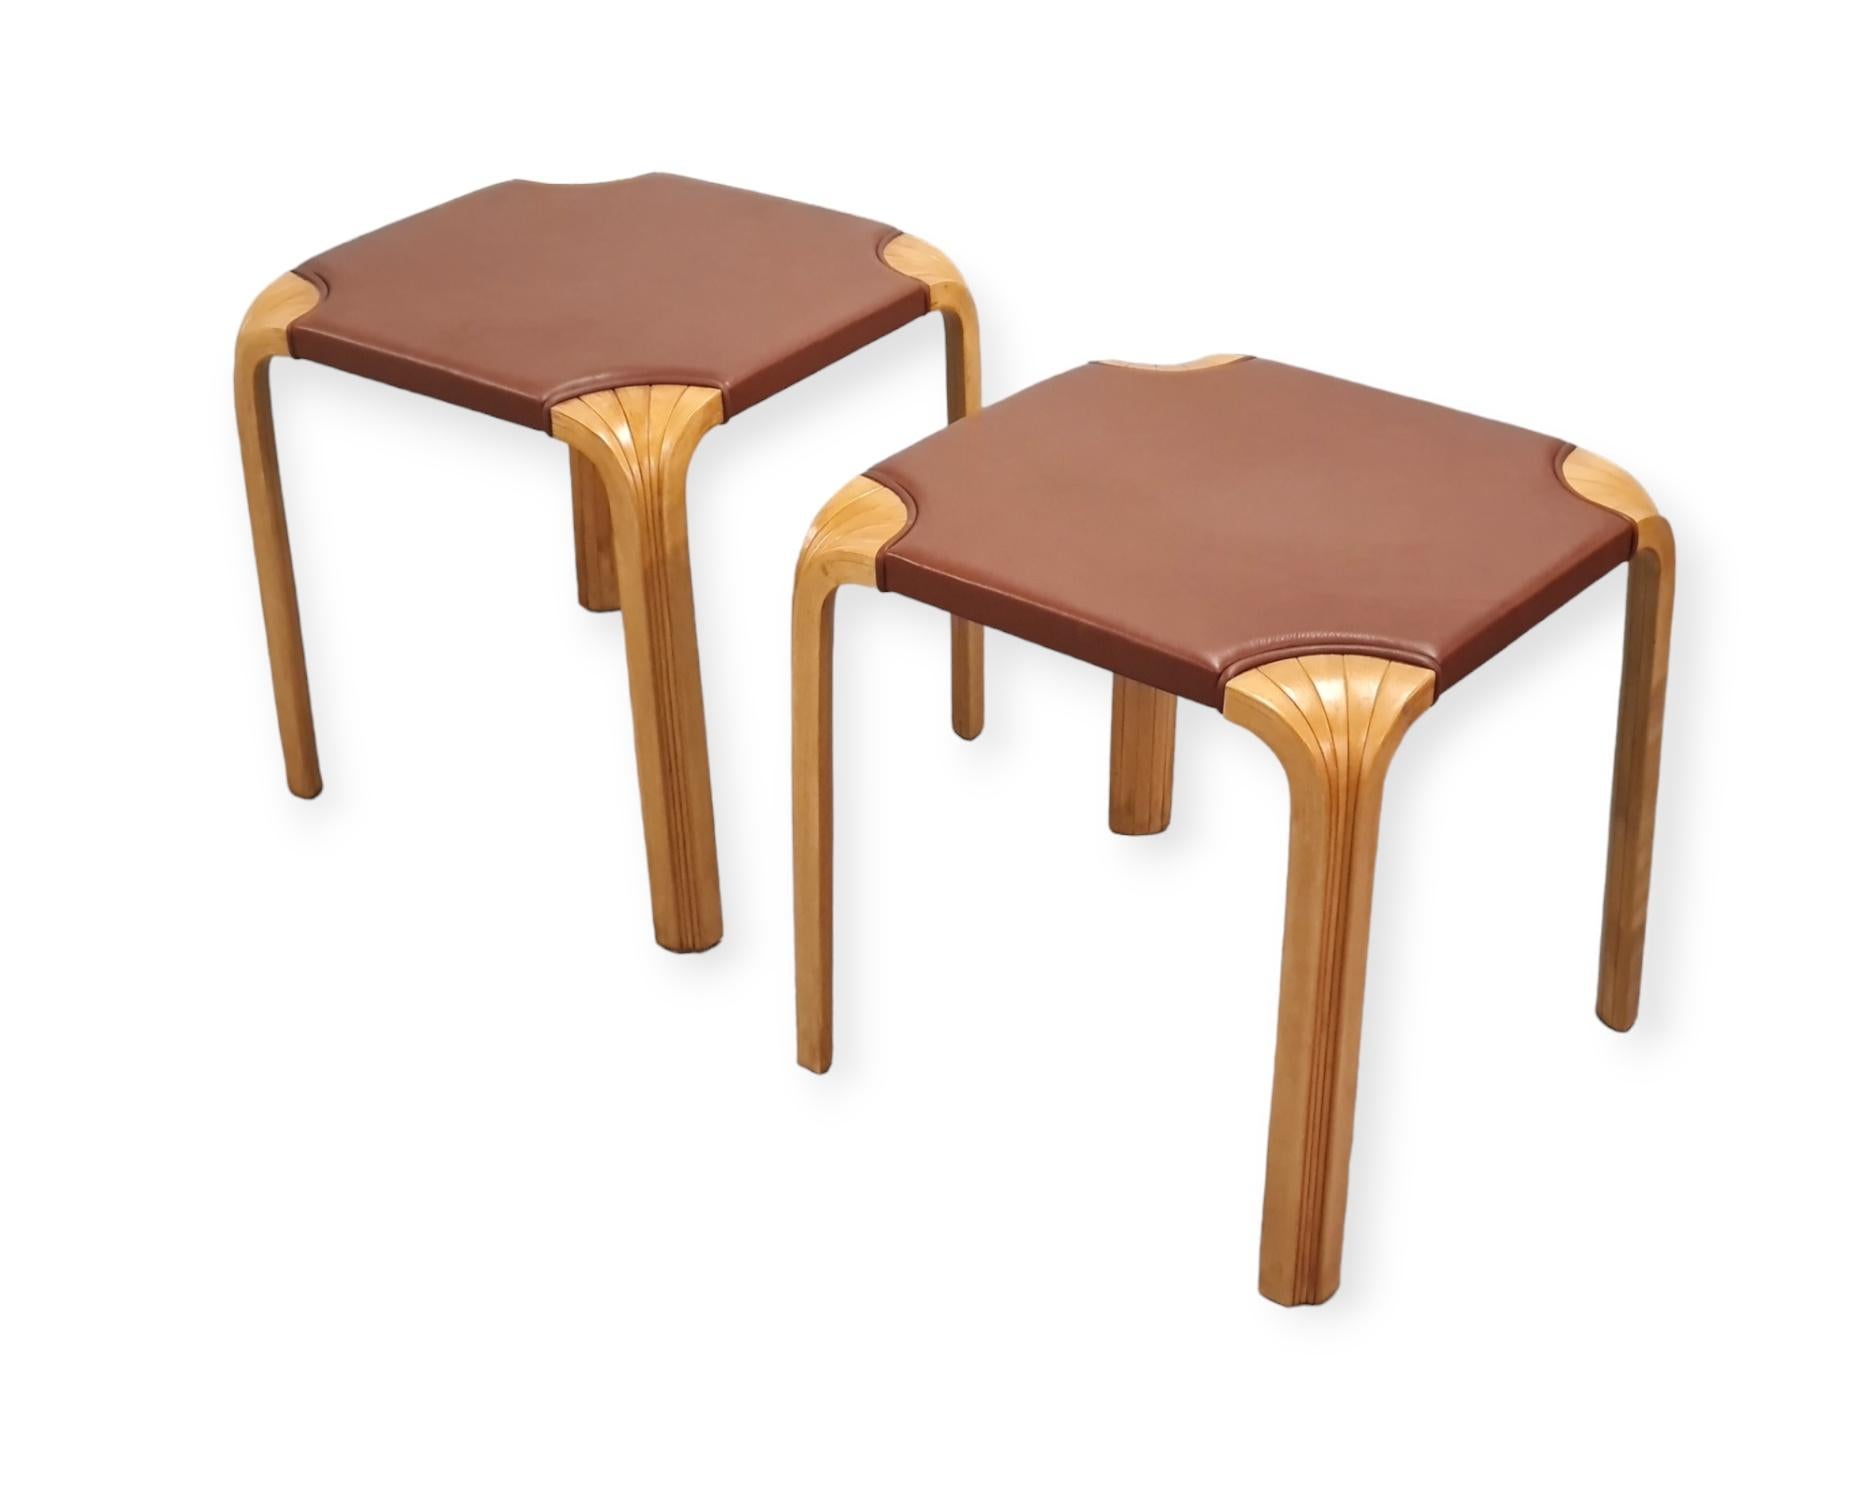 This stool was designed by Alvar Aalto for Artek originally in the 1950s. We have noticed throughout  the years that this stool has been often used as a bed side table. It can also be used as a table or as a flower stand for example. A simple and